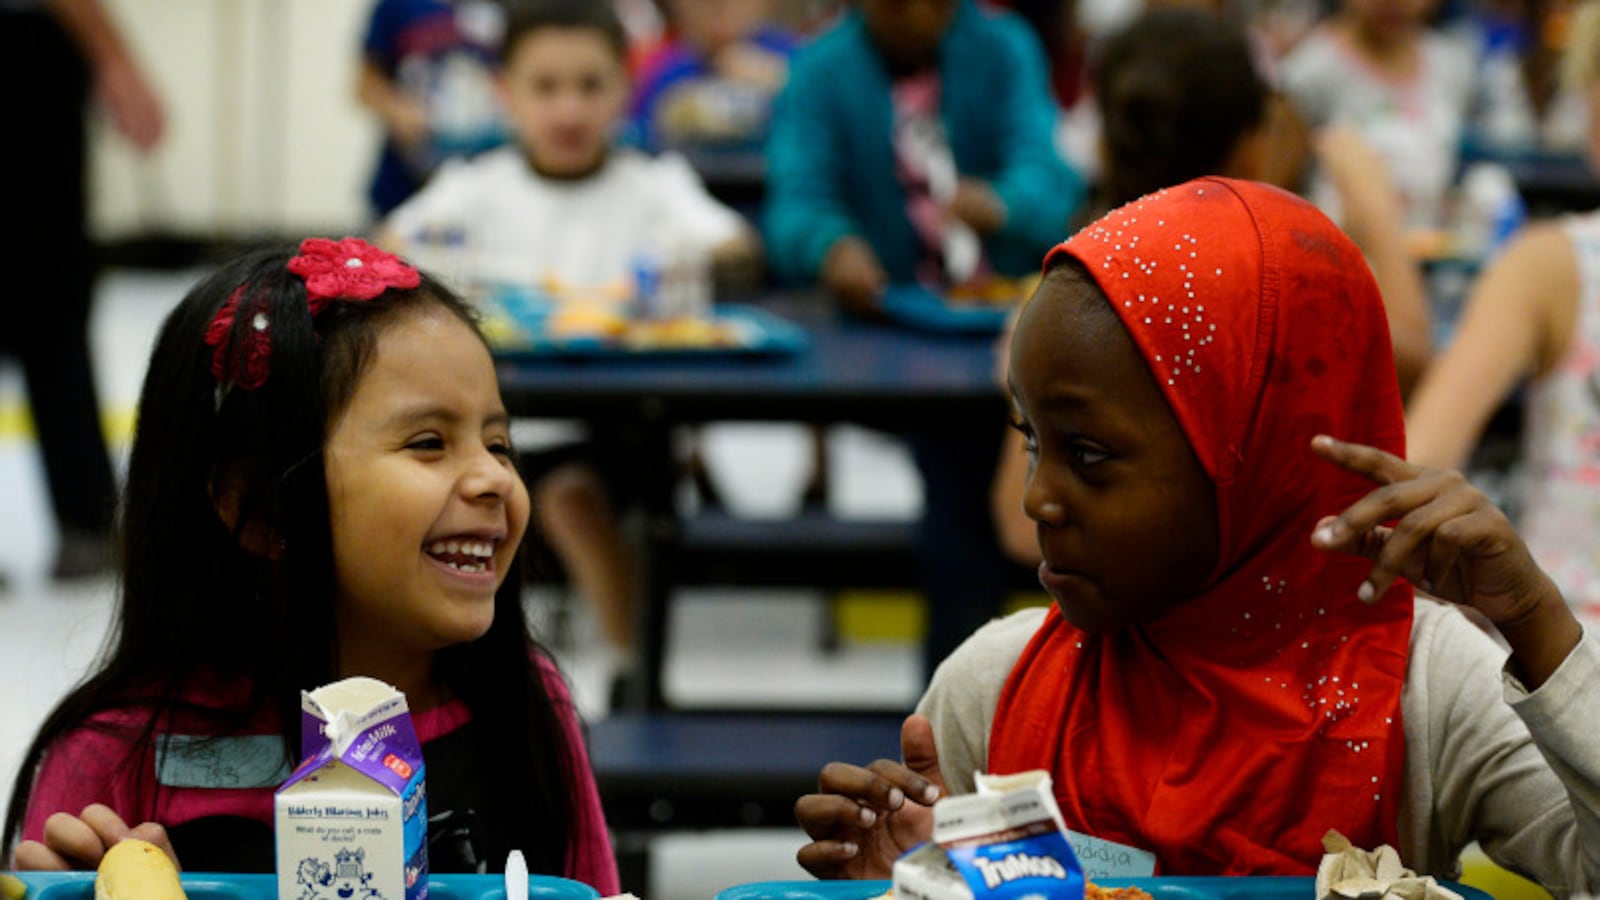 First graders eat their lunch at Laredo Elementary School in Aurora. (Photo by Seth McConnell/The Denver Post)